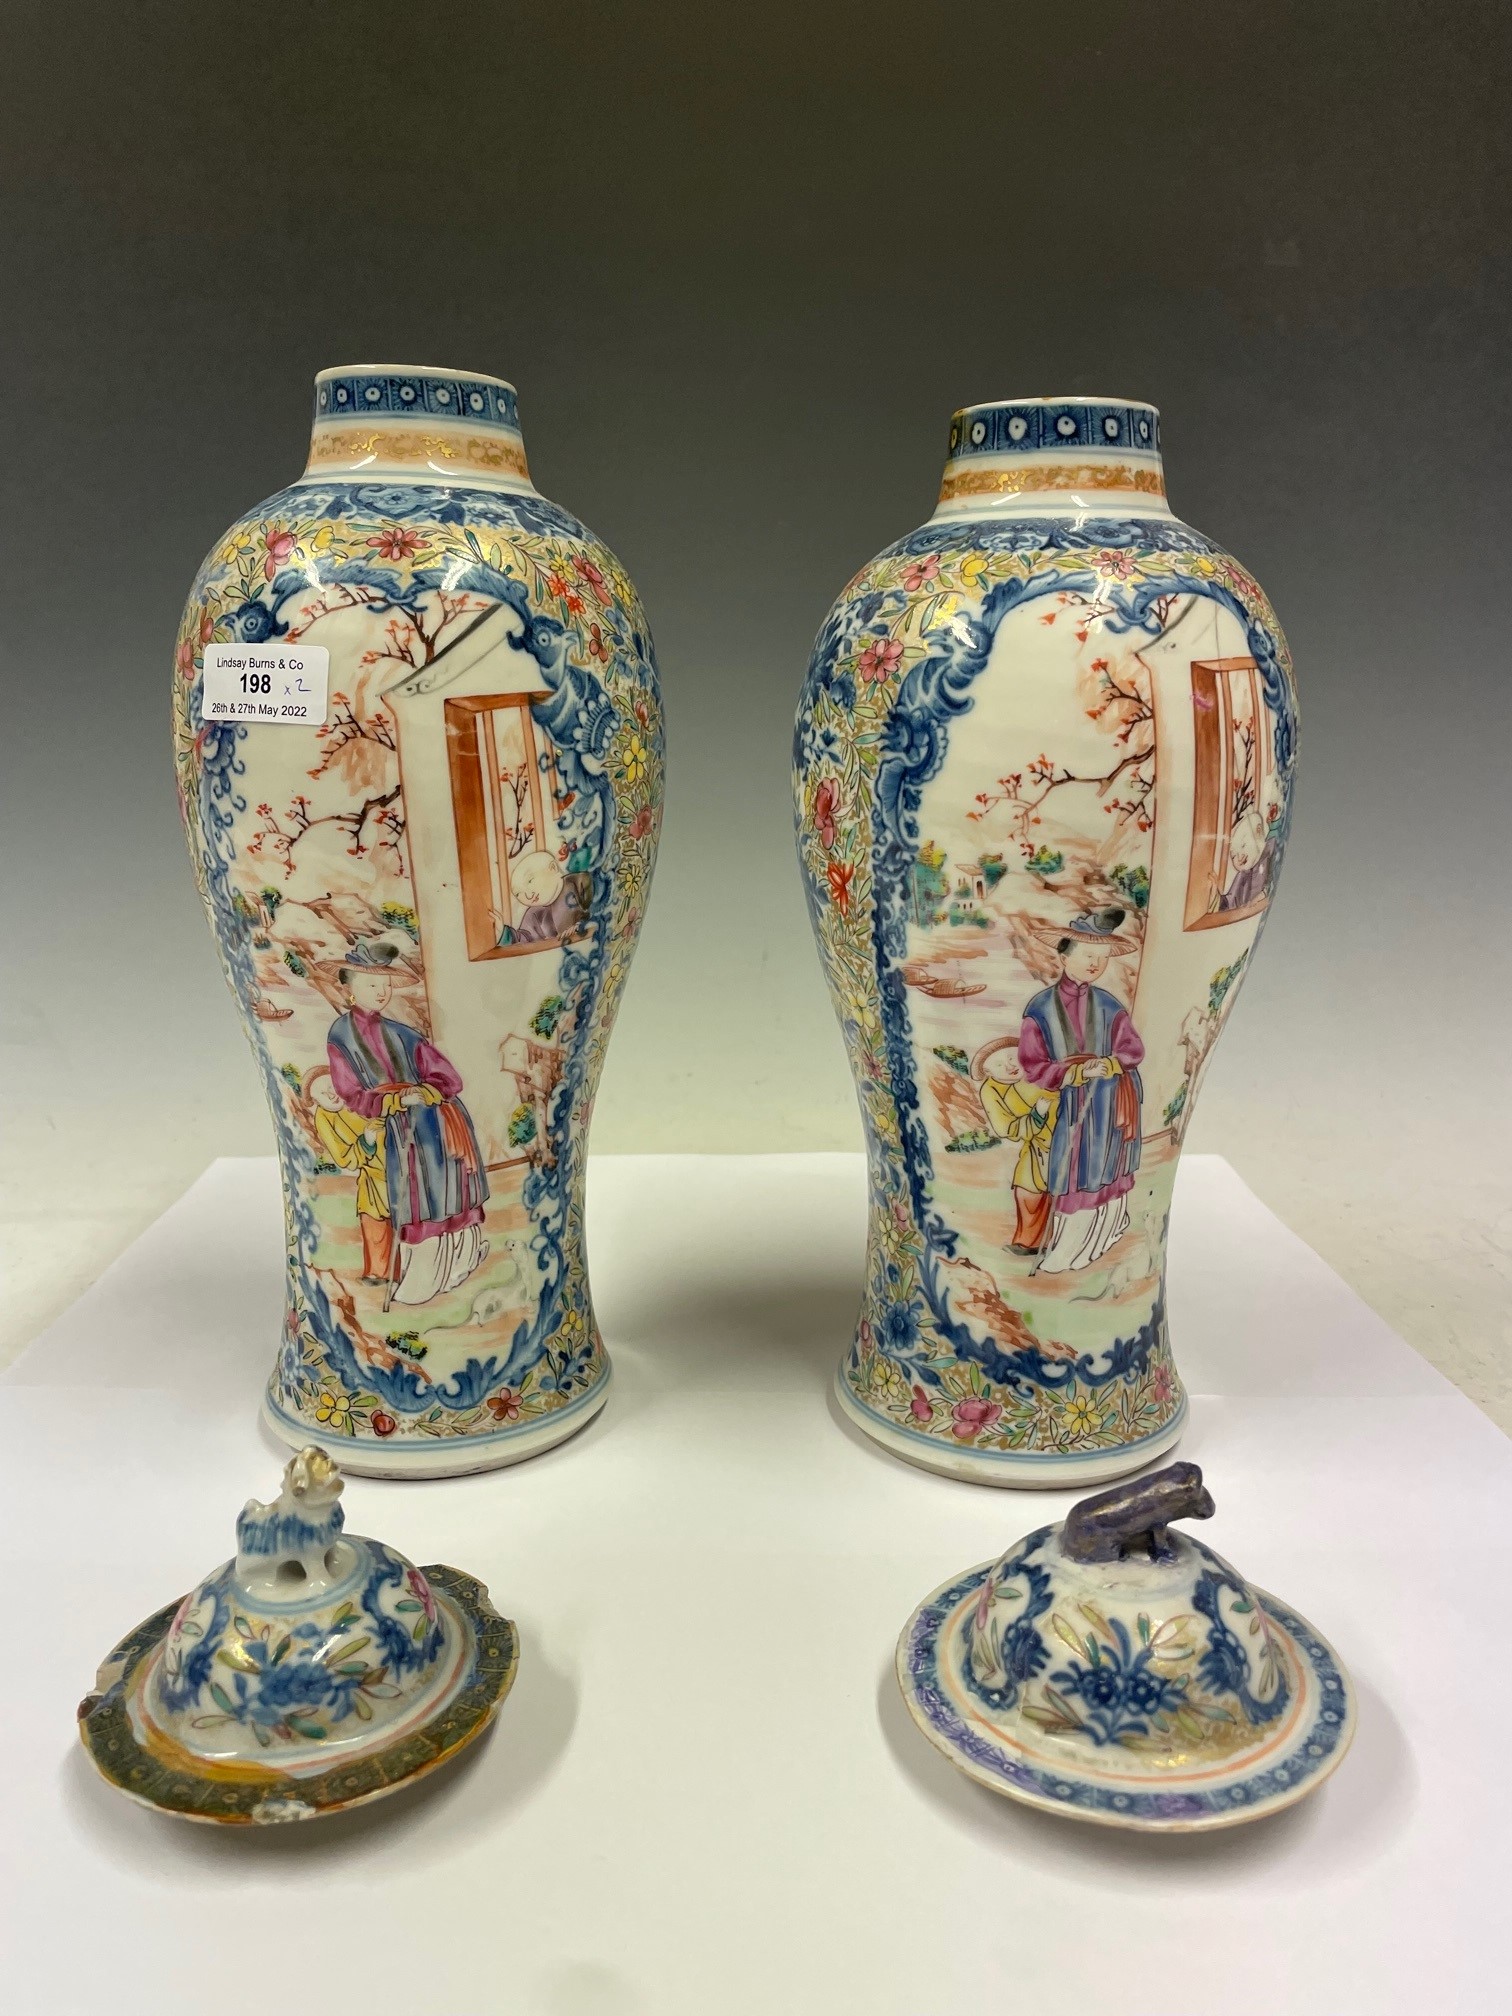 A PAIR OF CHINESE PORCELAIN BLUE AND WHITE JARS AND COVERS, QING DYNASTY, WITH FAMILLE ROSE ENAMEL - Image 2 of 7